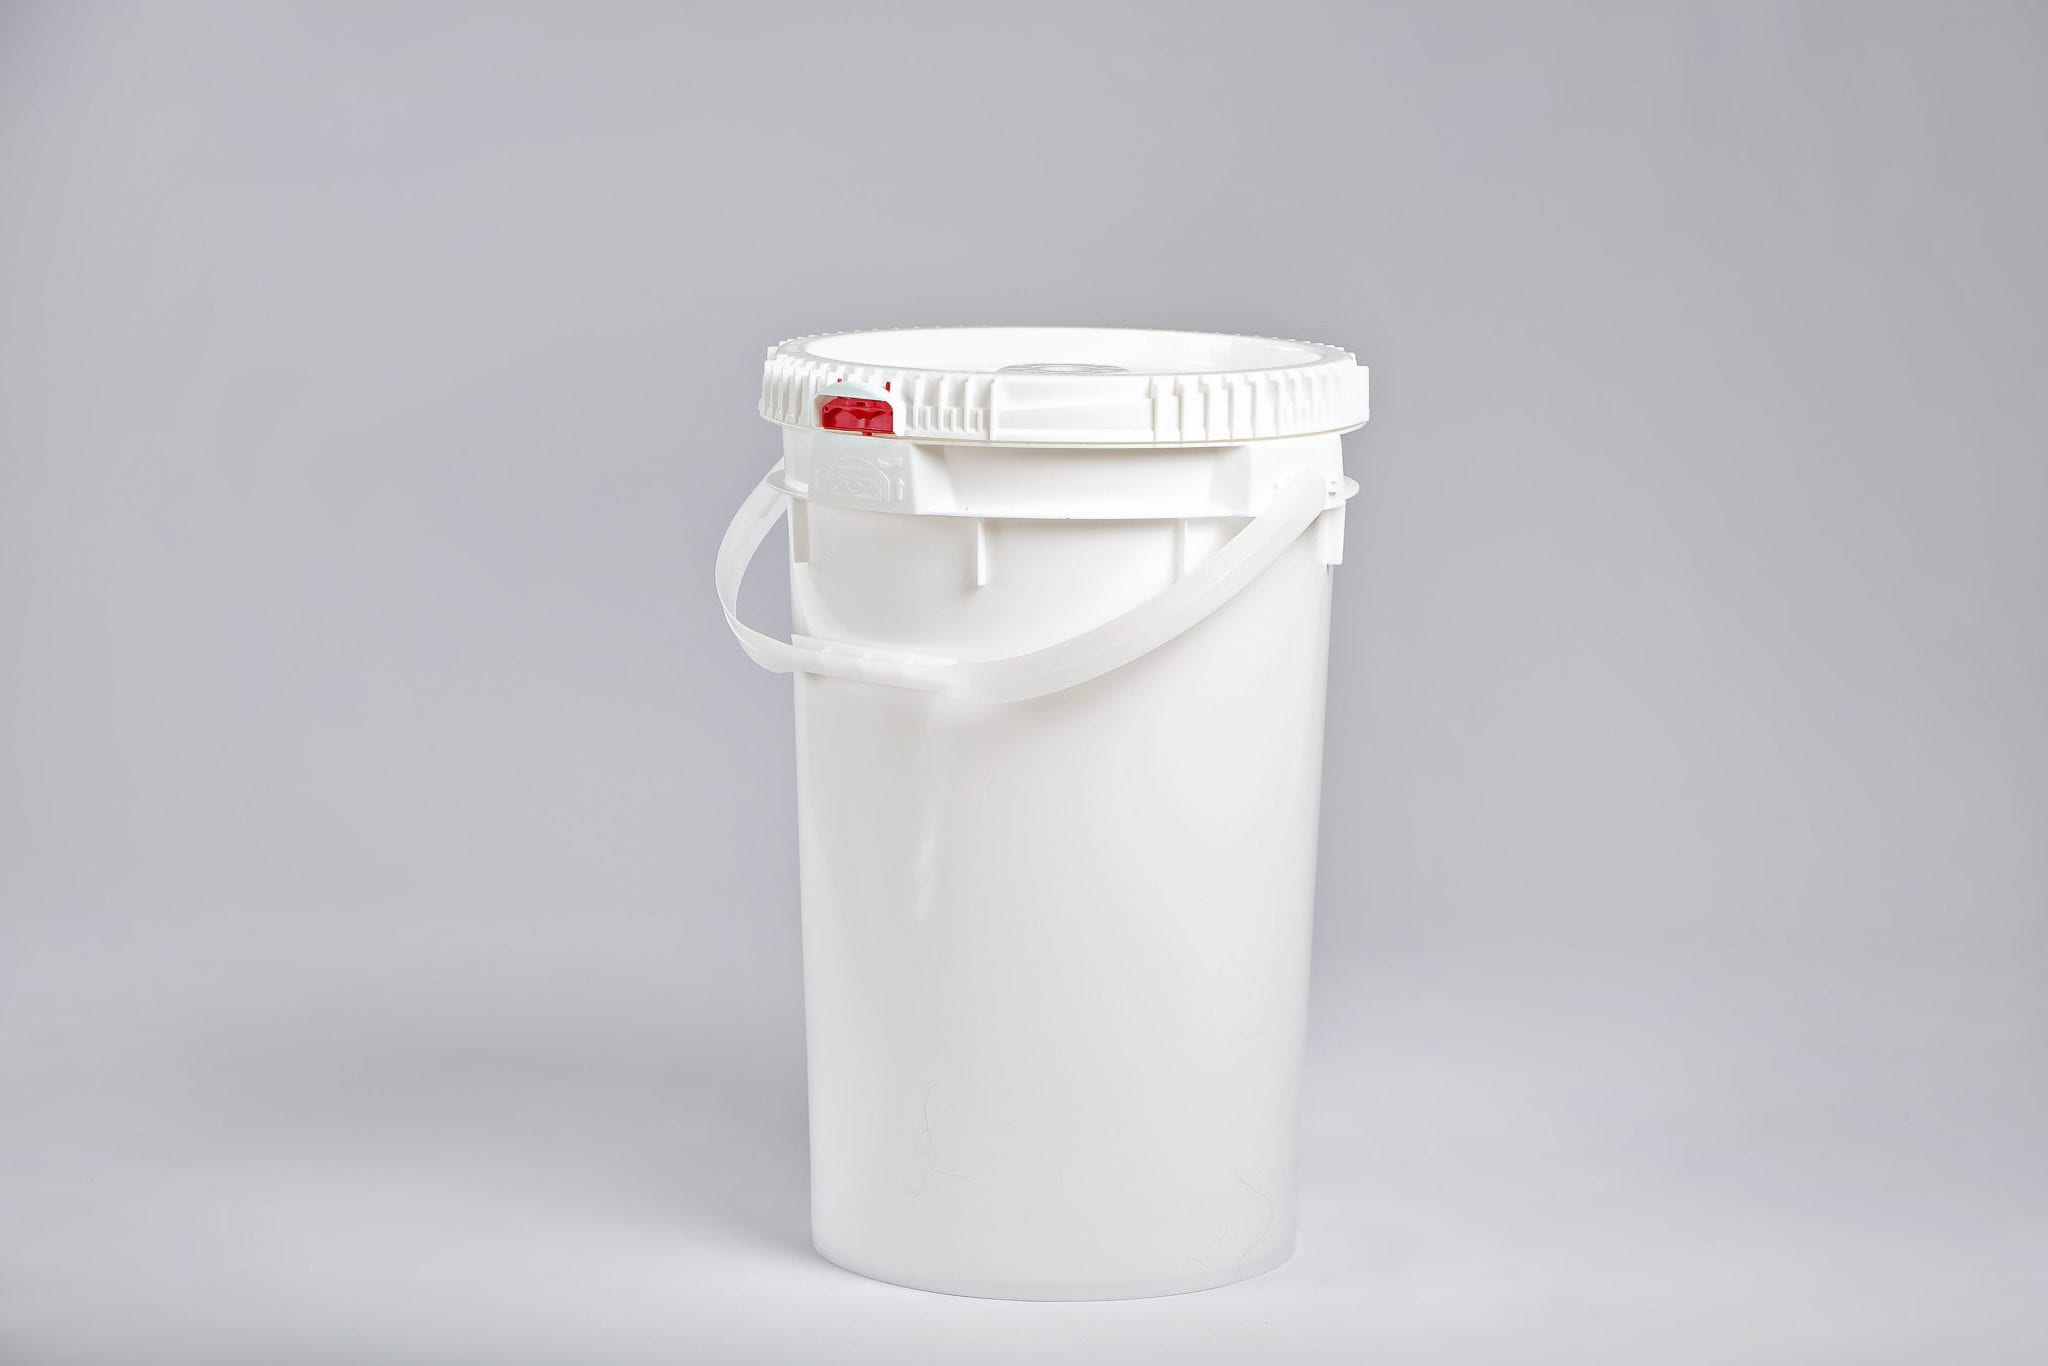 Buy 1 Gallon white plastic pail with handle - lid available ($2.00